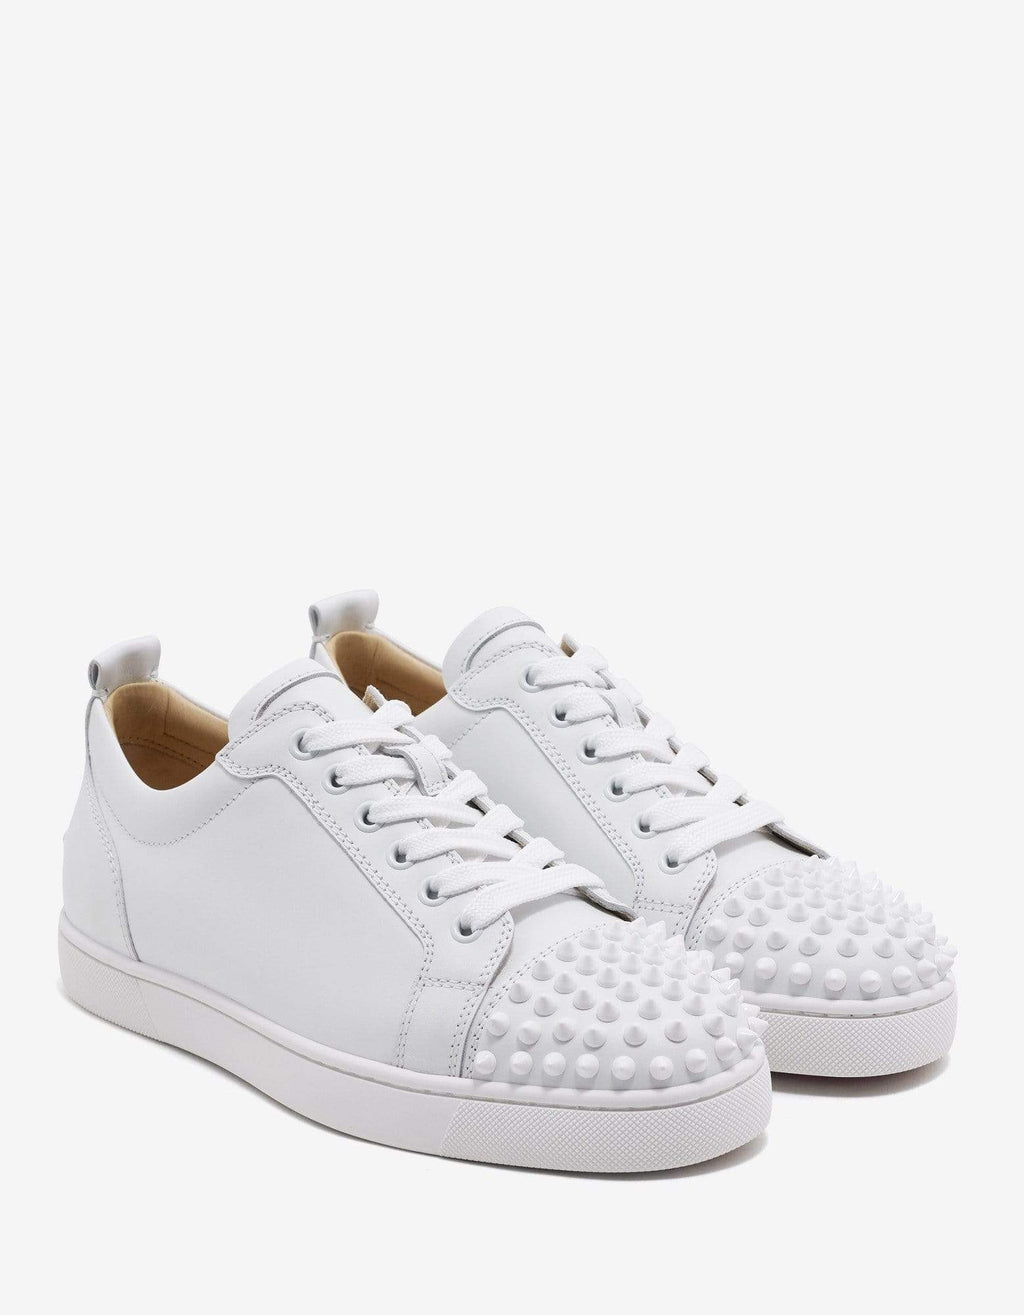 Christian Louboutin Louis Junior Spikes Flat White Leather Trainers ...